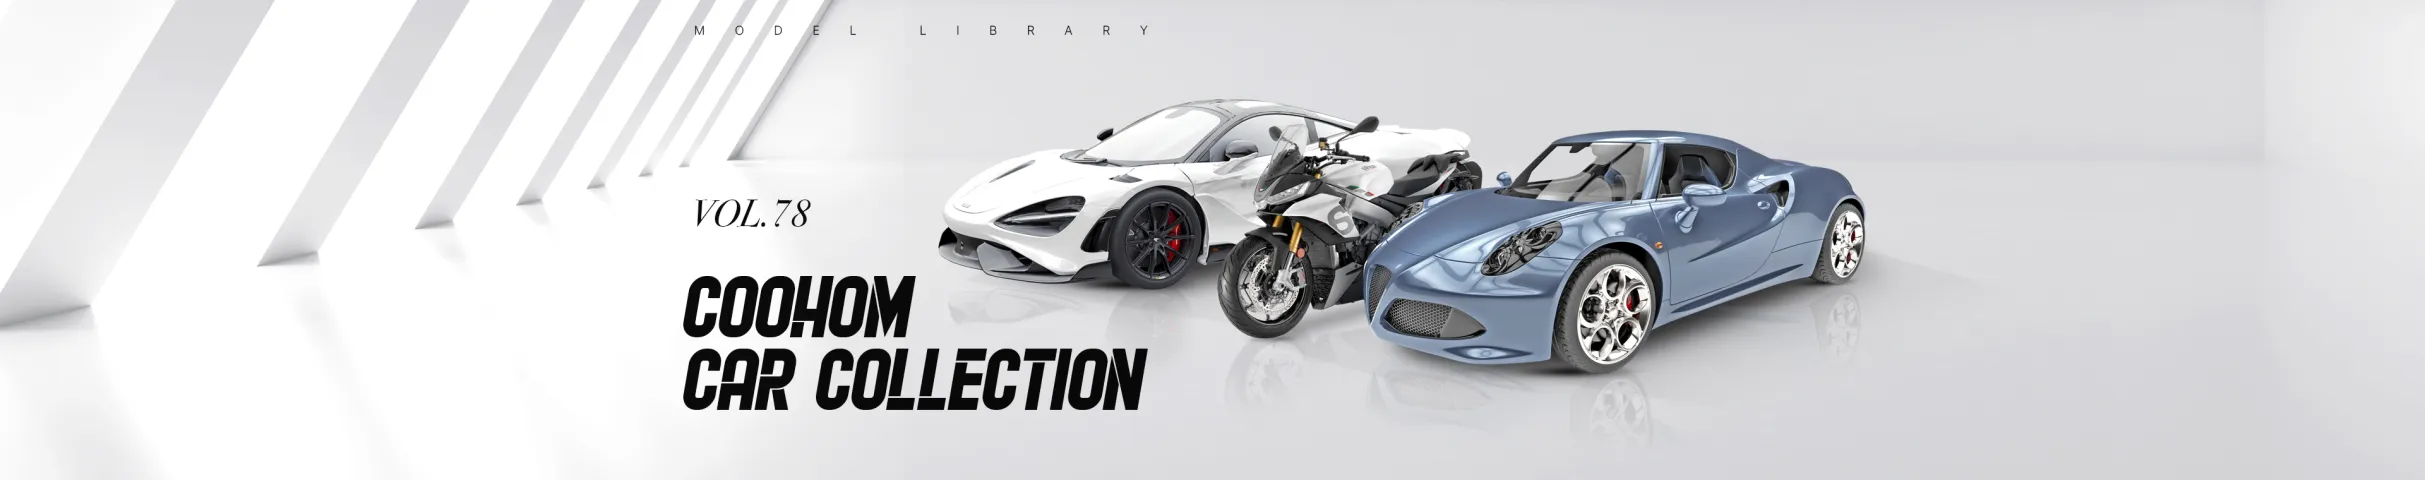 Coohom Car Collection